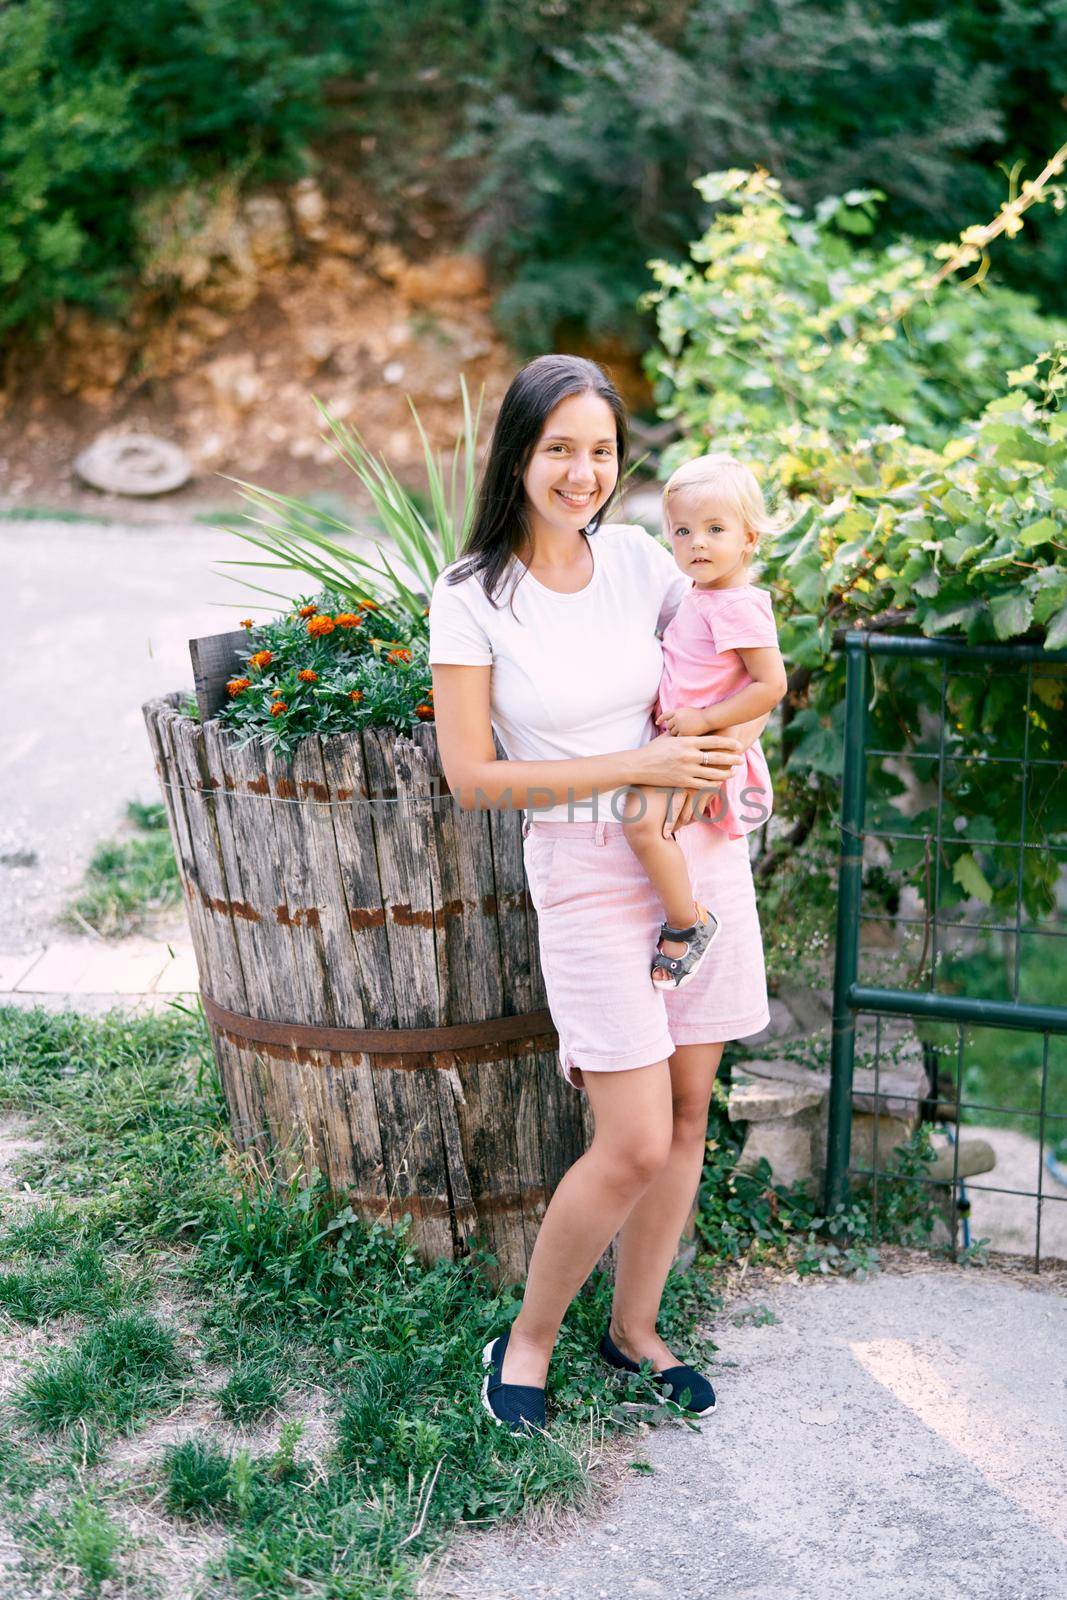 Smiling mom with a little daughter in her arms near a wooden barrel with flowers. High quality photo